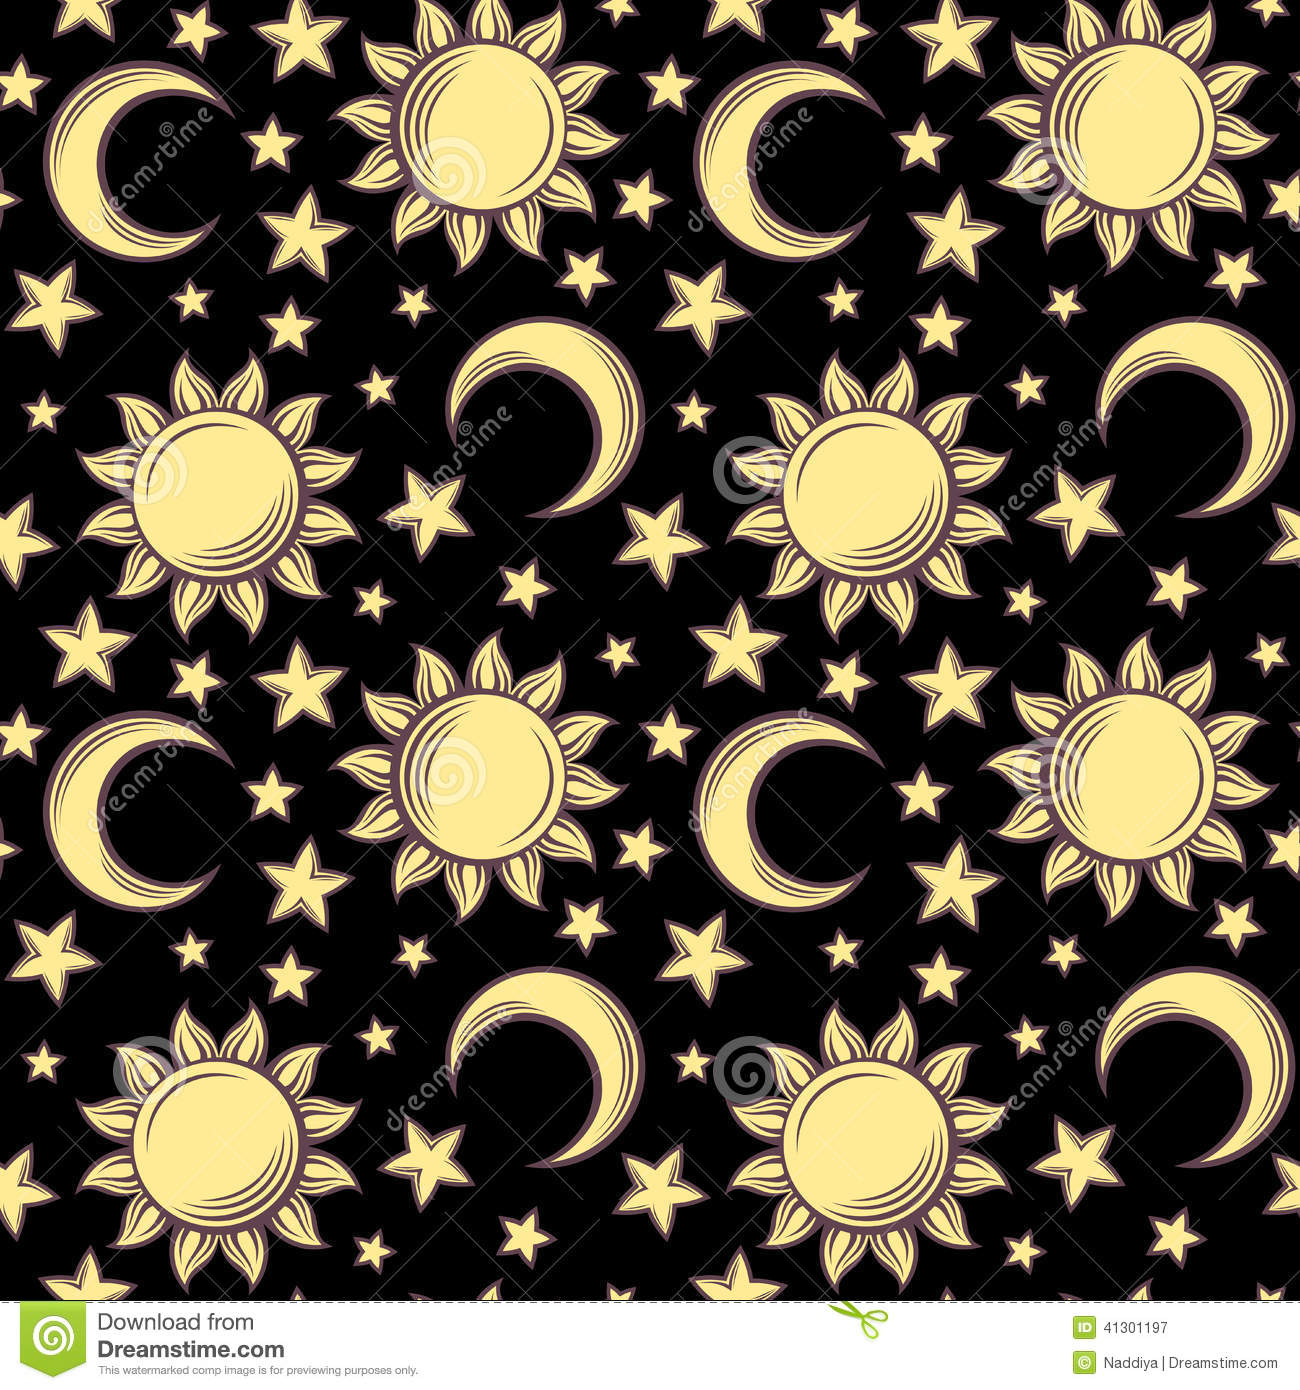 Sun Moon Background Images HD Pictures and Wallpaper For Free Download   Pngtree